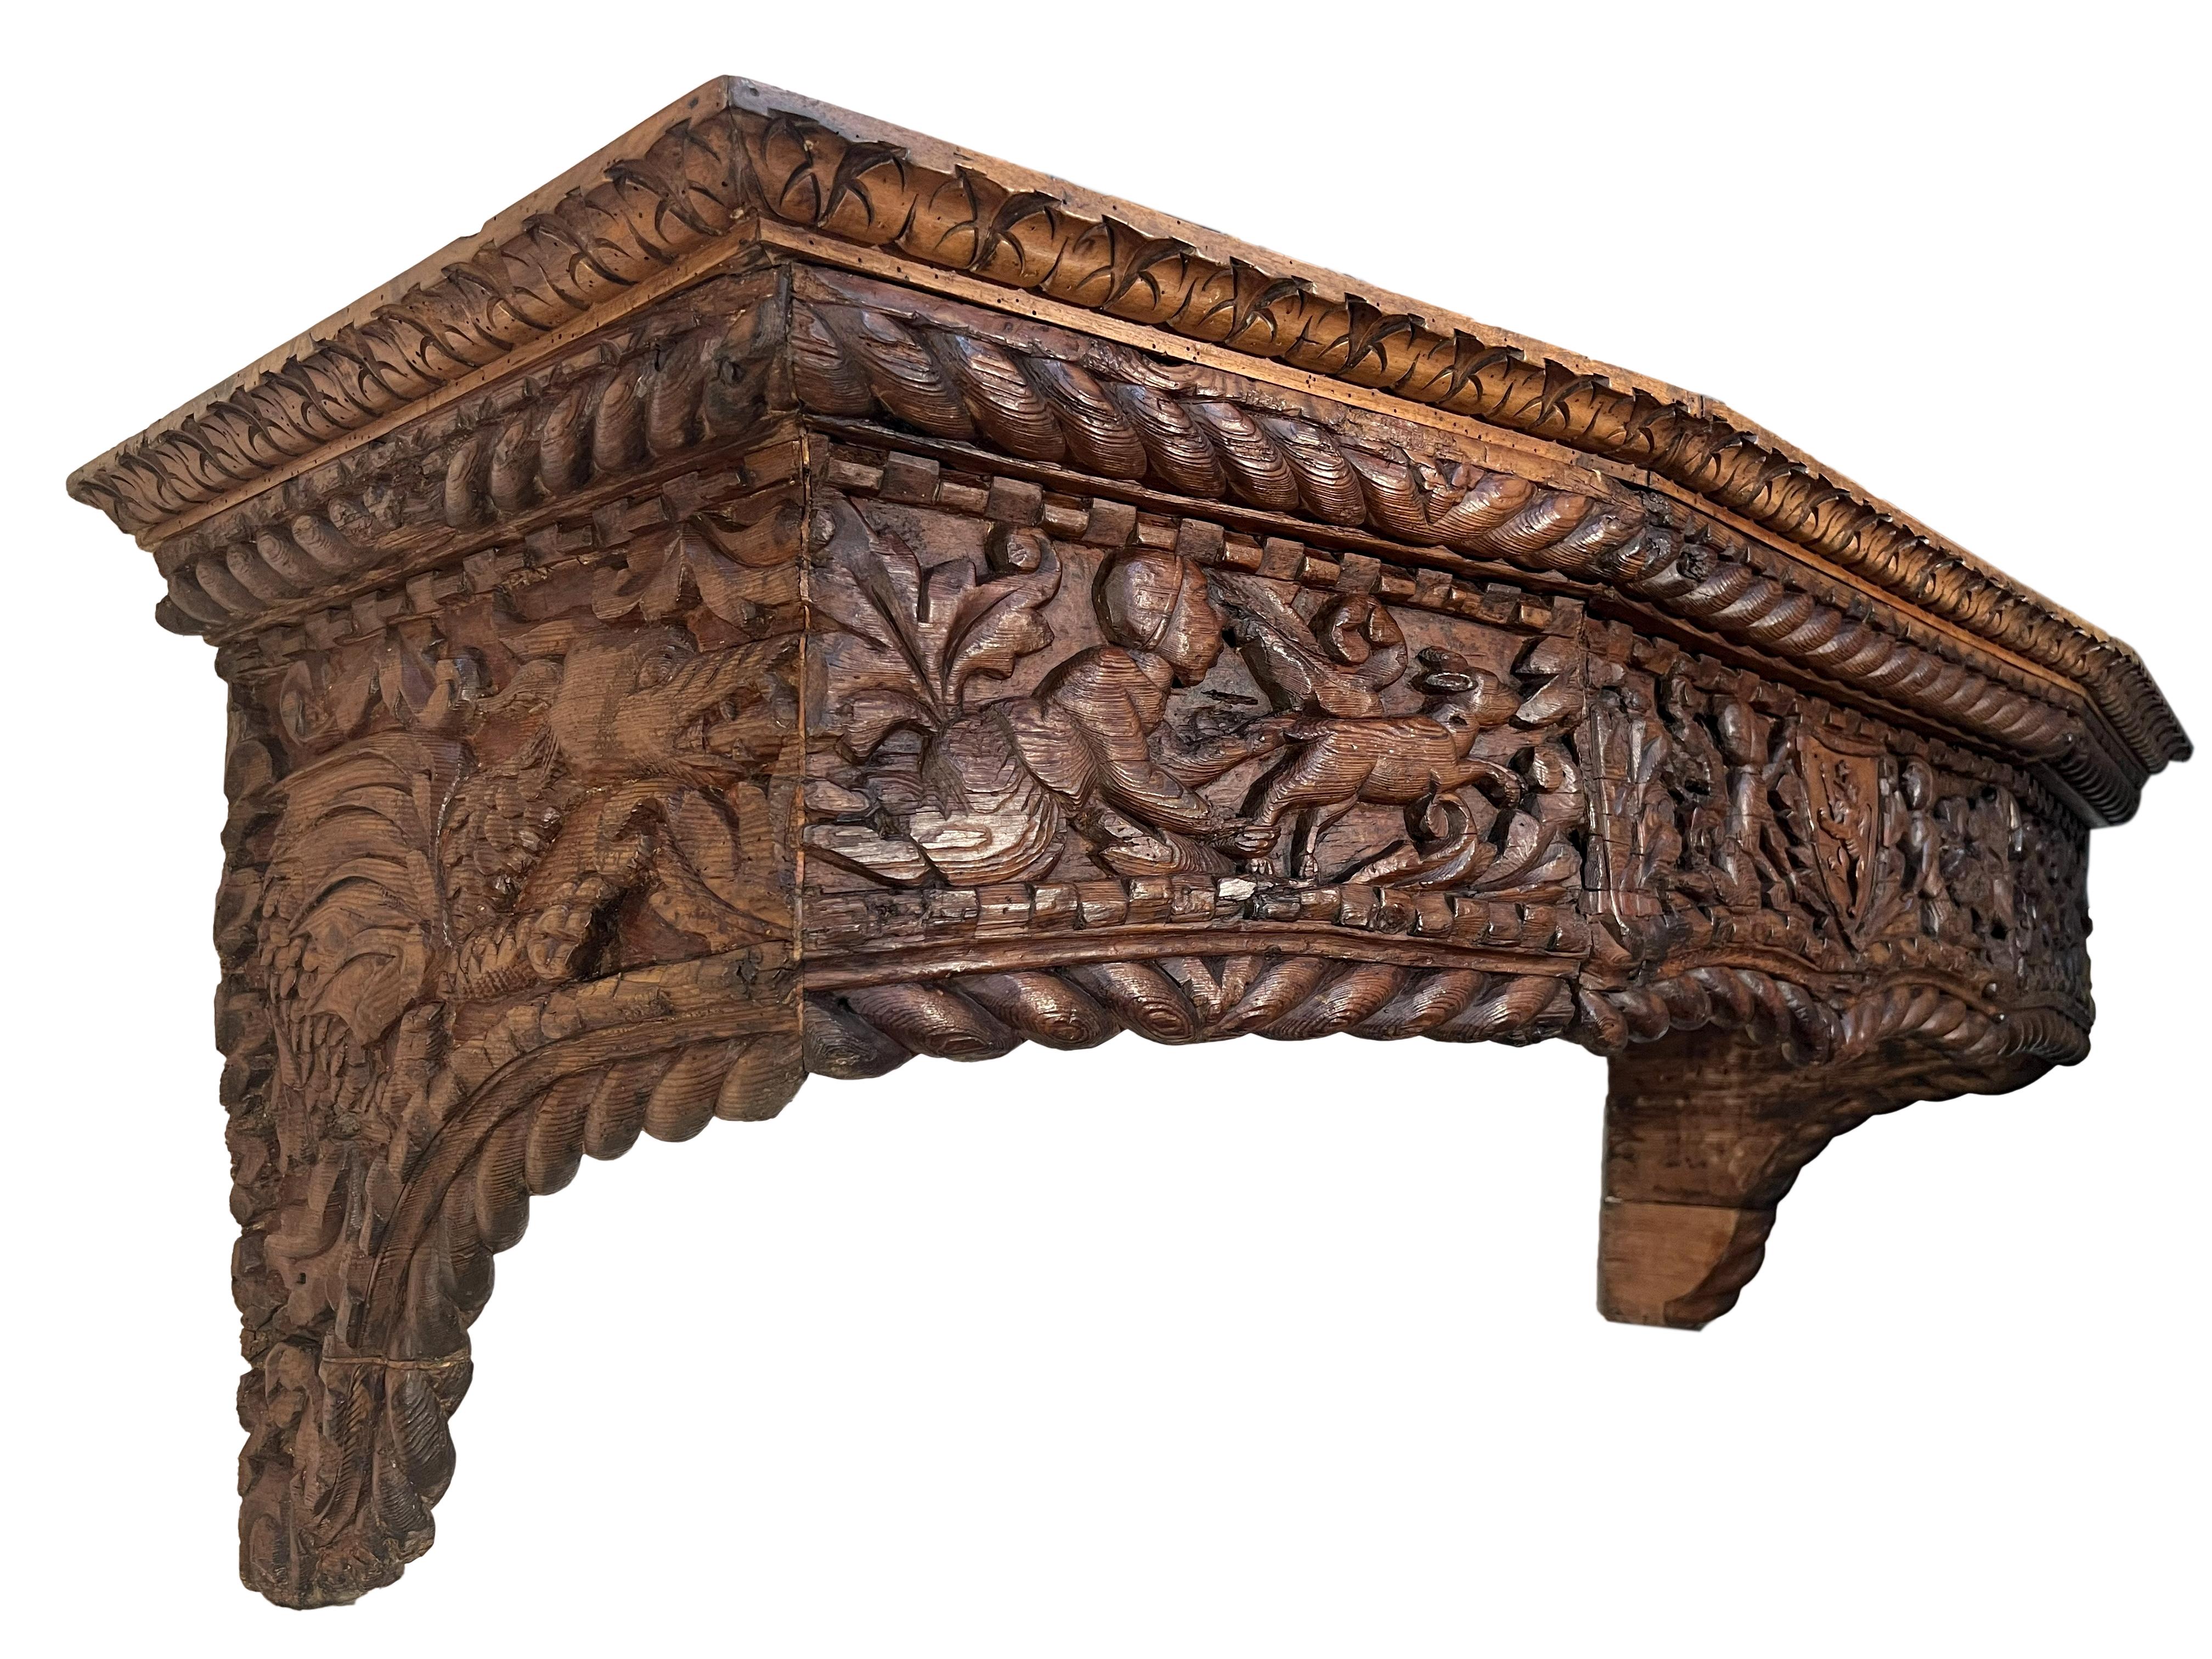 Carved Antique North Italian Chestnut Renaissance style Fire place Mantel. For Sale